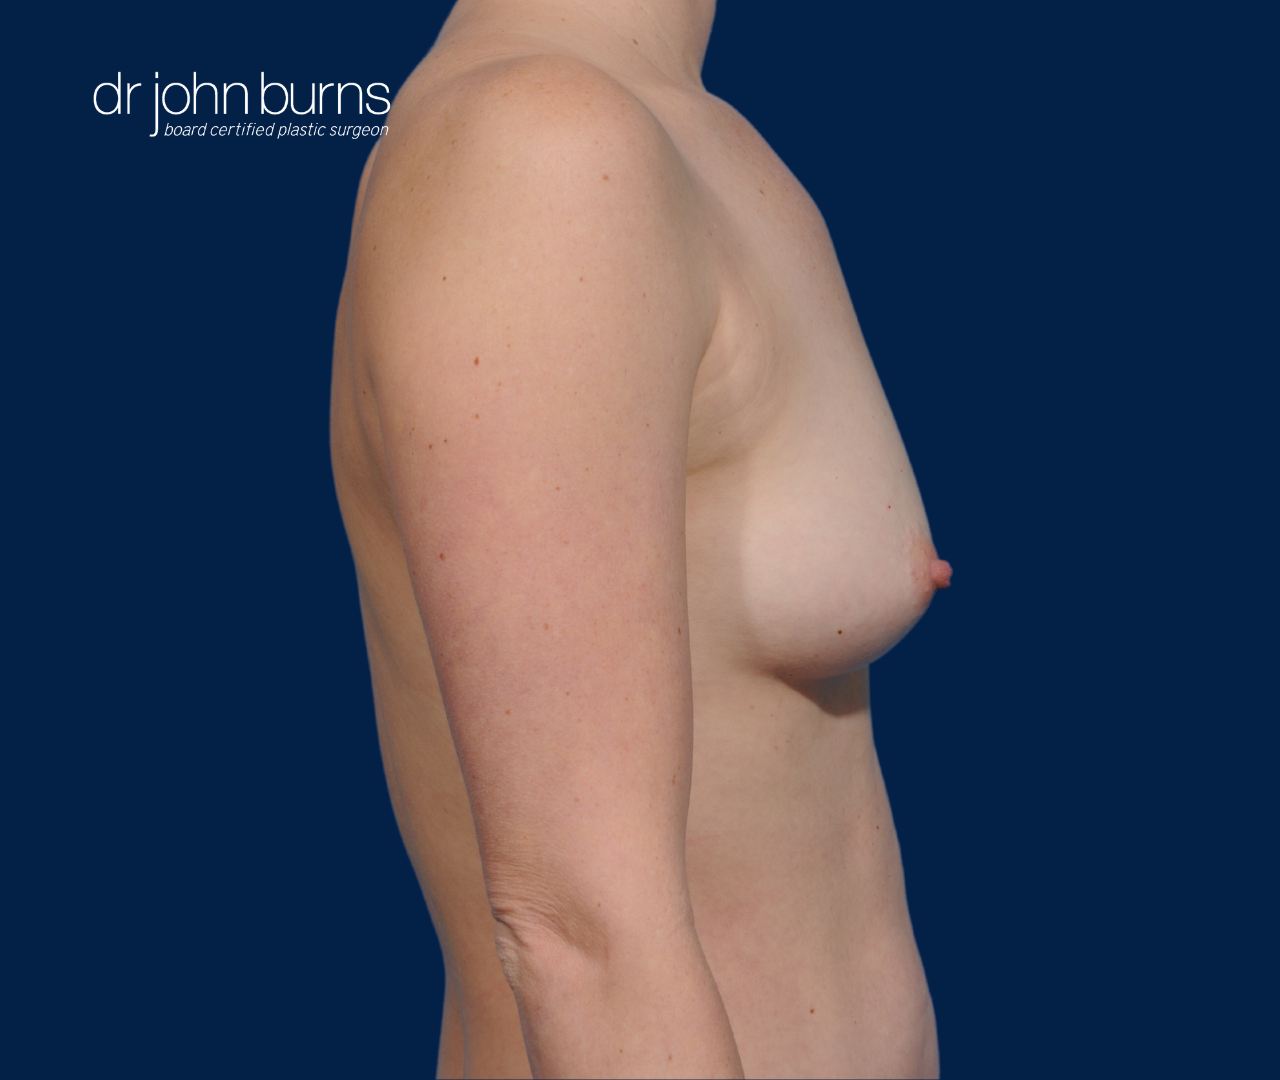 case 4- profile view | after fat transfer to breast by top plastic surgeon, Dr. John Burns